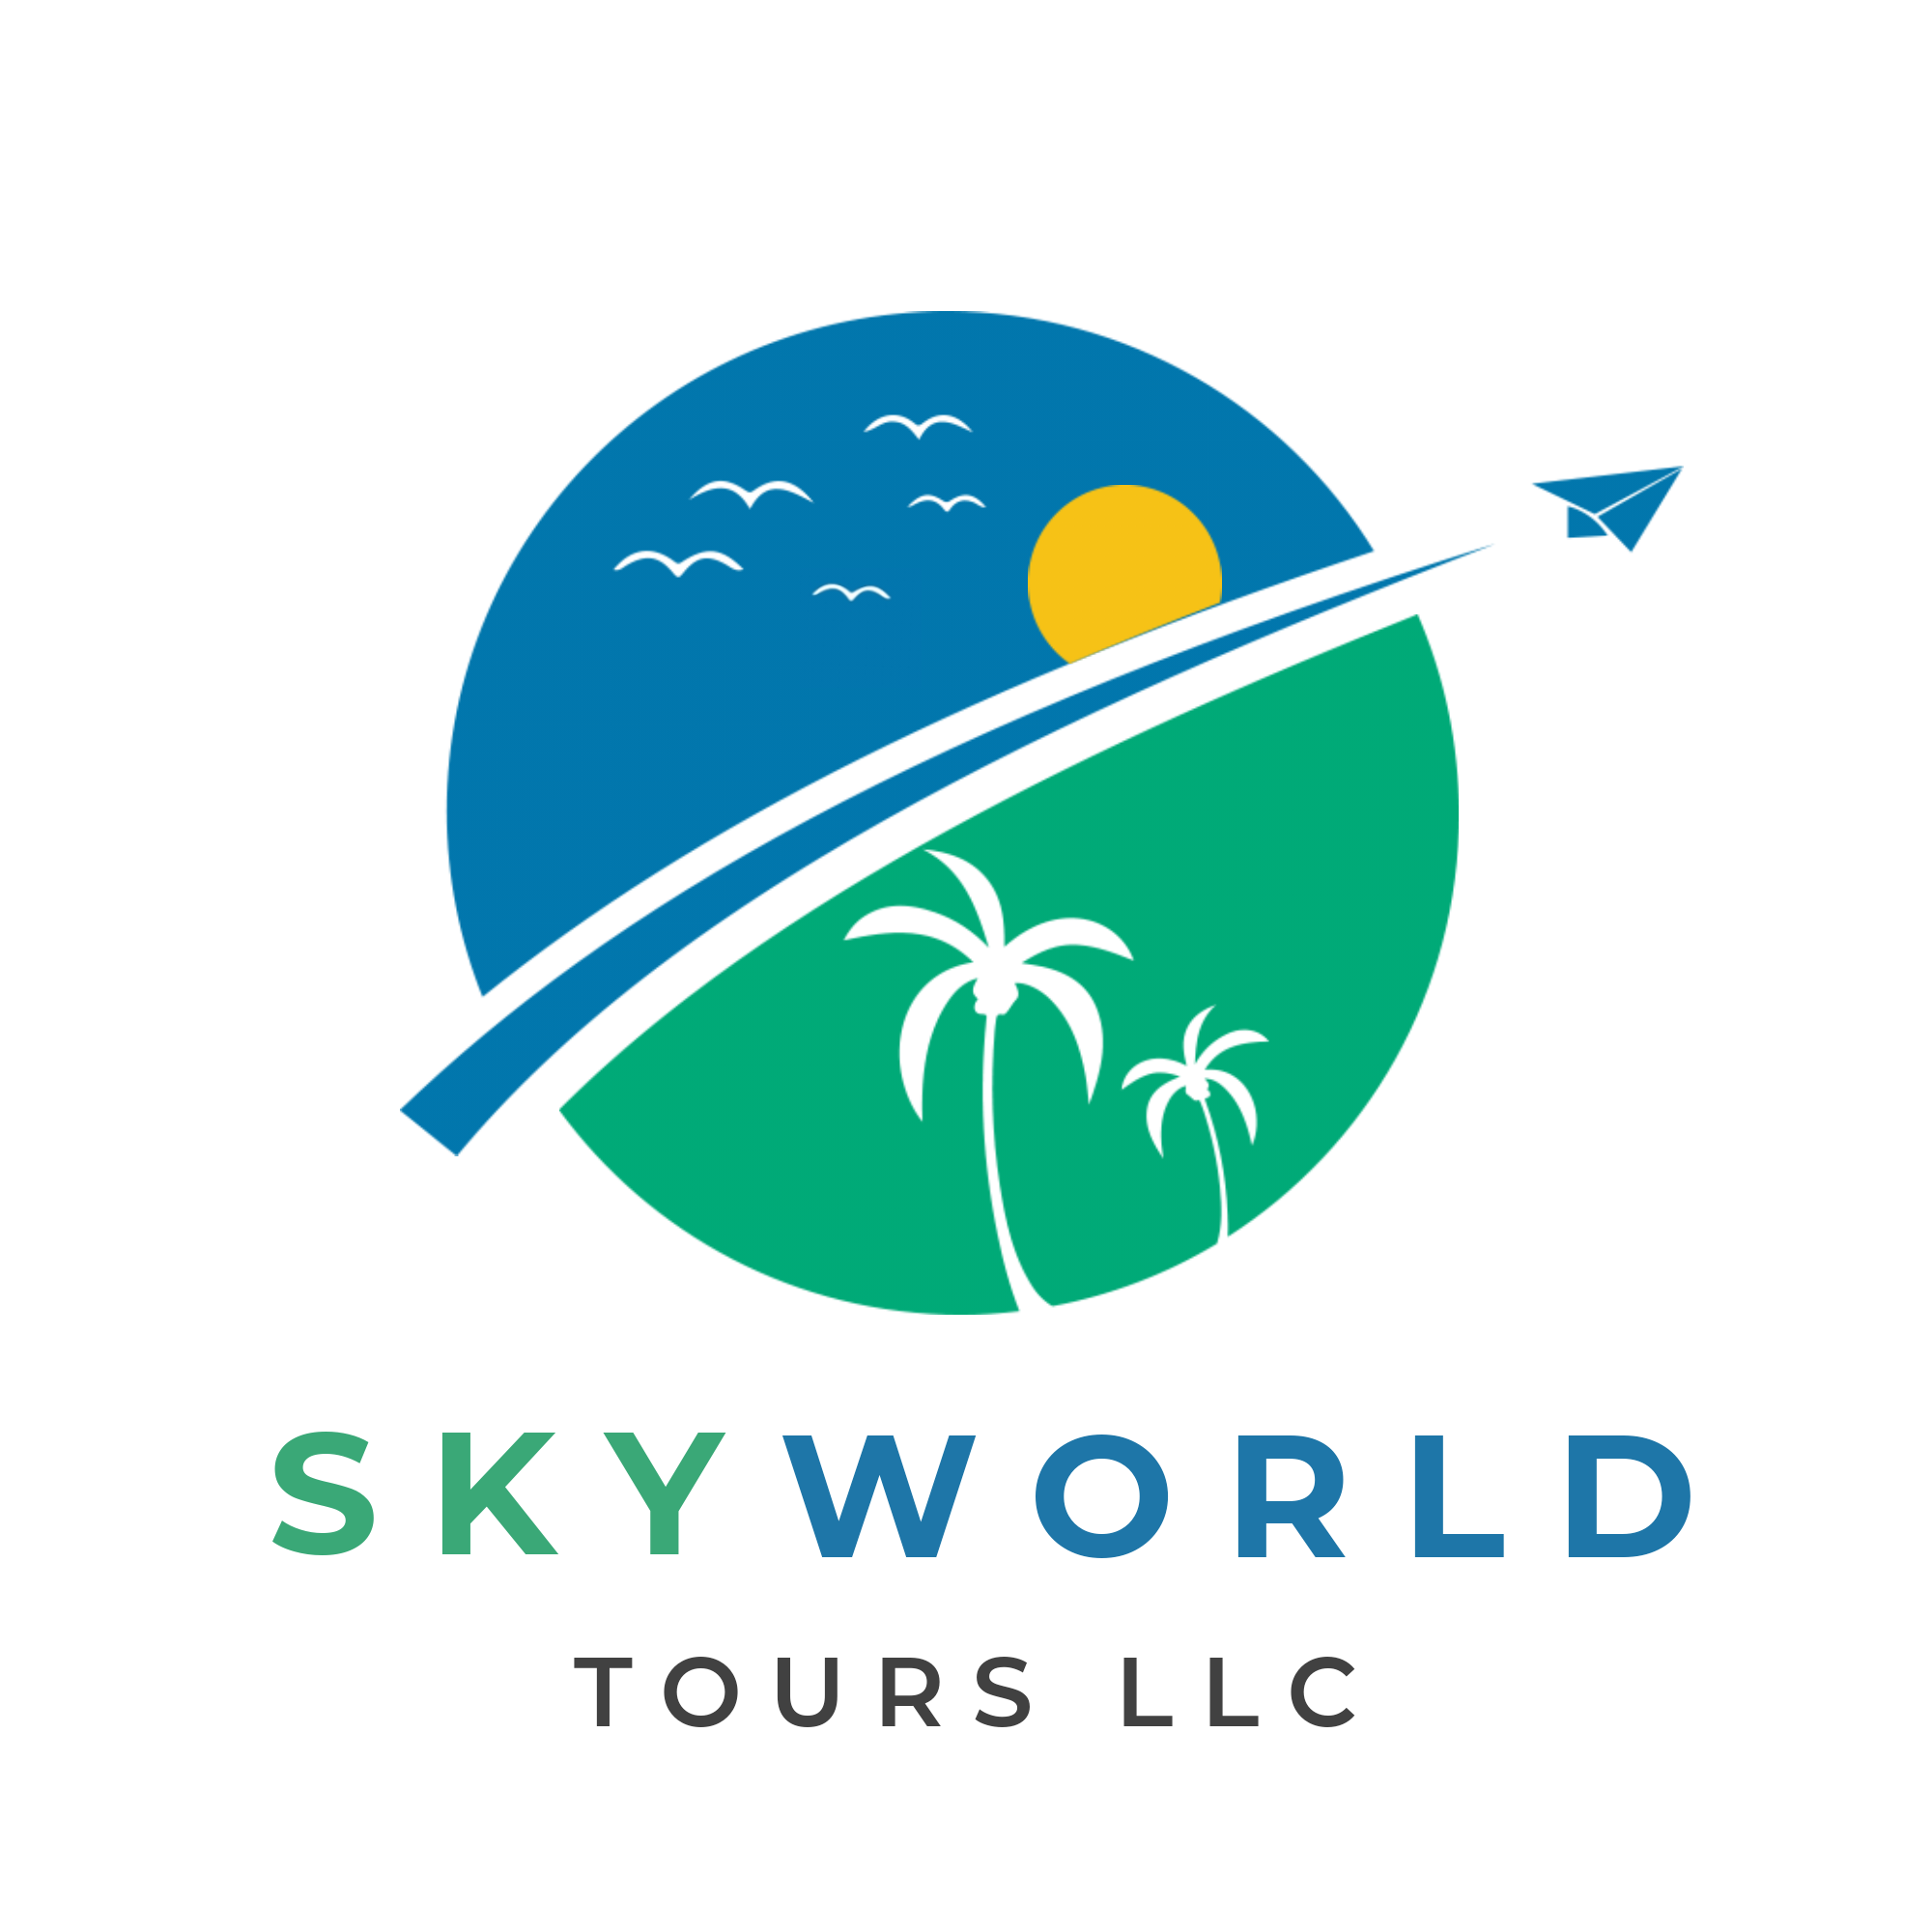 sky world travel and tours